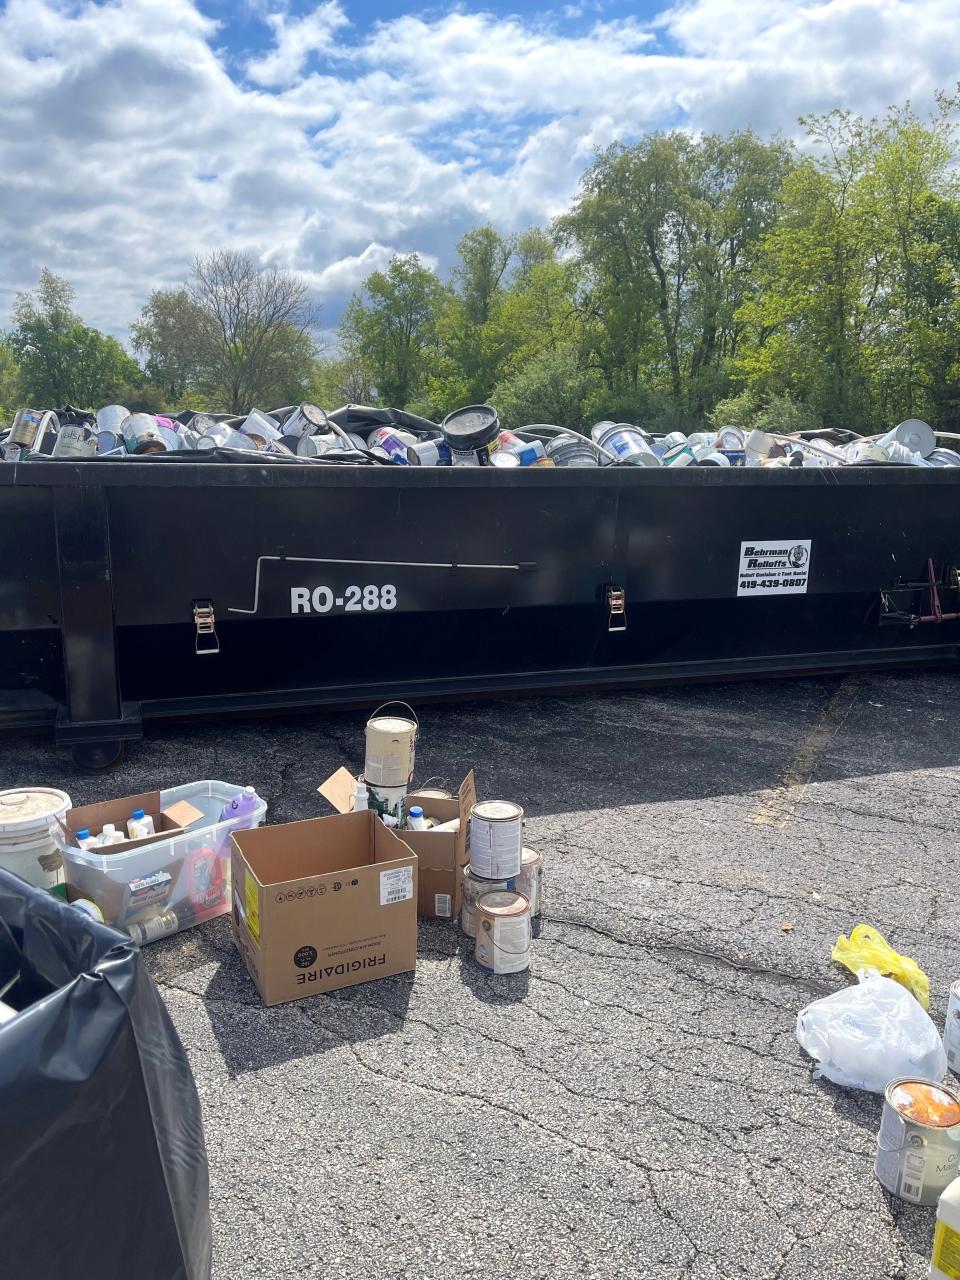 This year, Wacker Chemical and Anderson Development collected more than 80,000 lbs. of household hazardous waste from Lenawee County residents during an annual household hazardous waste collection event.